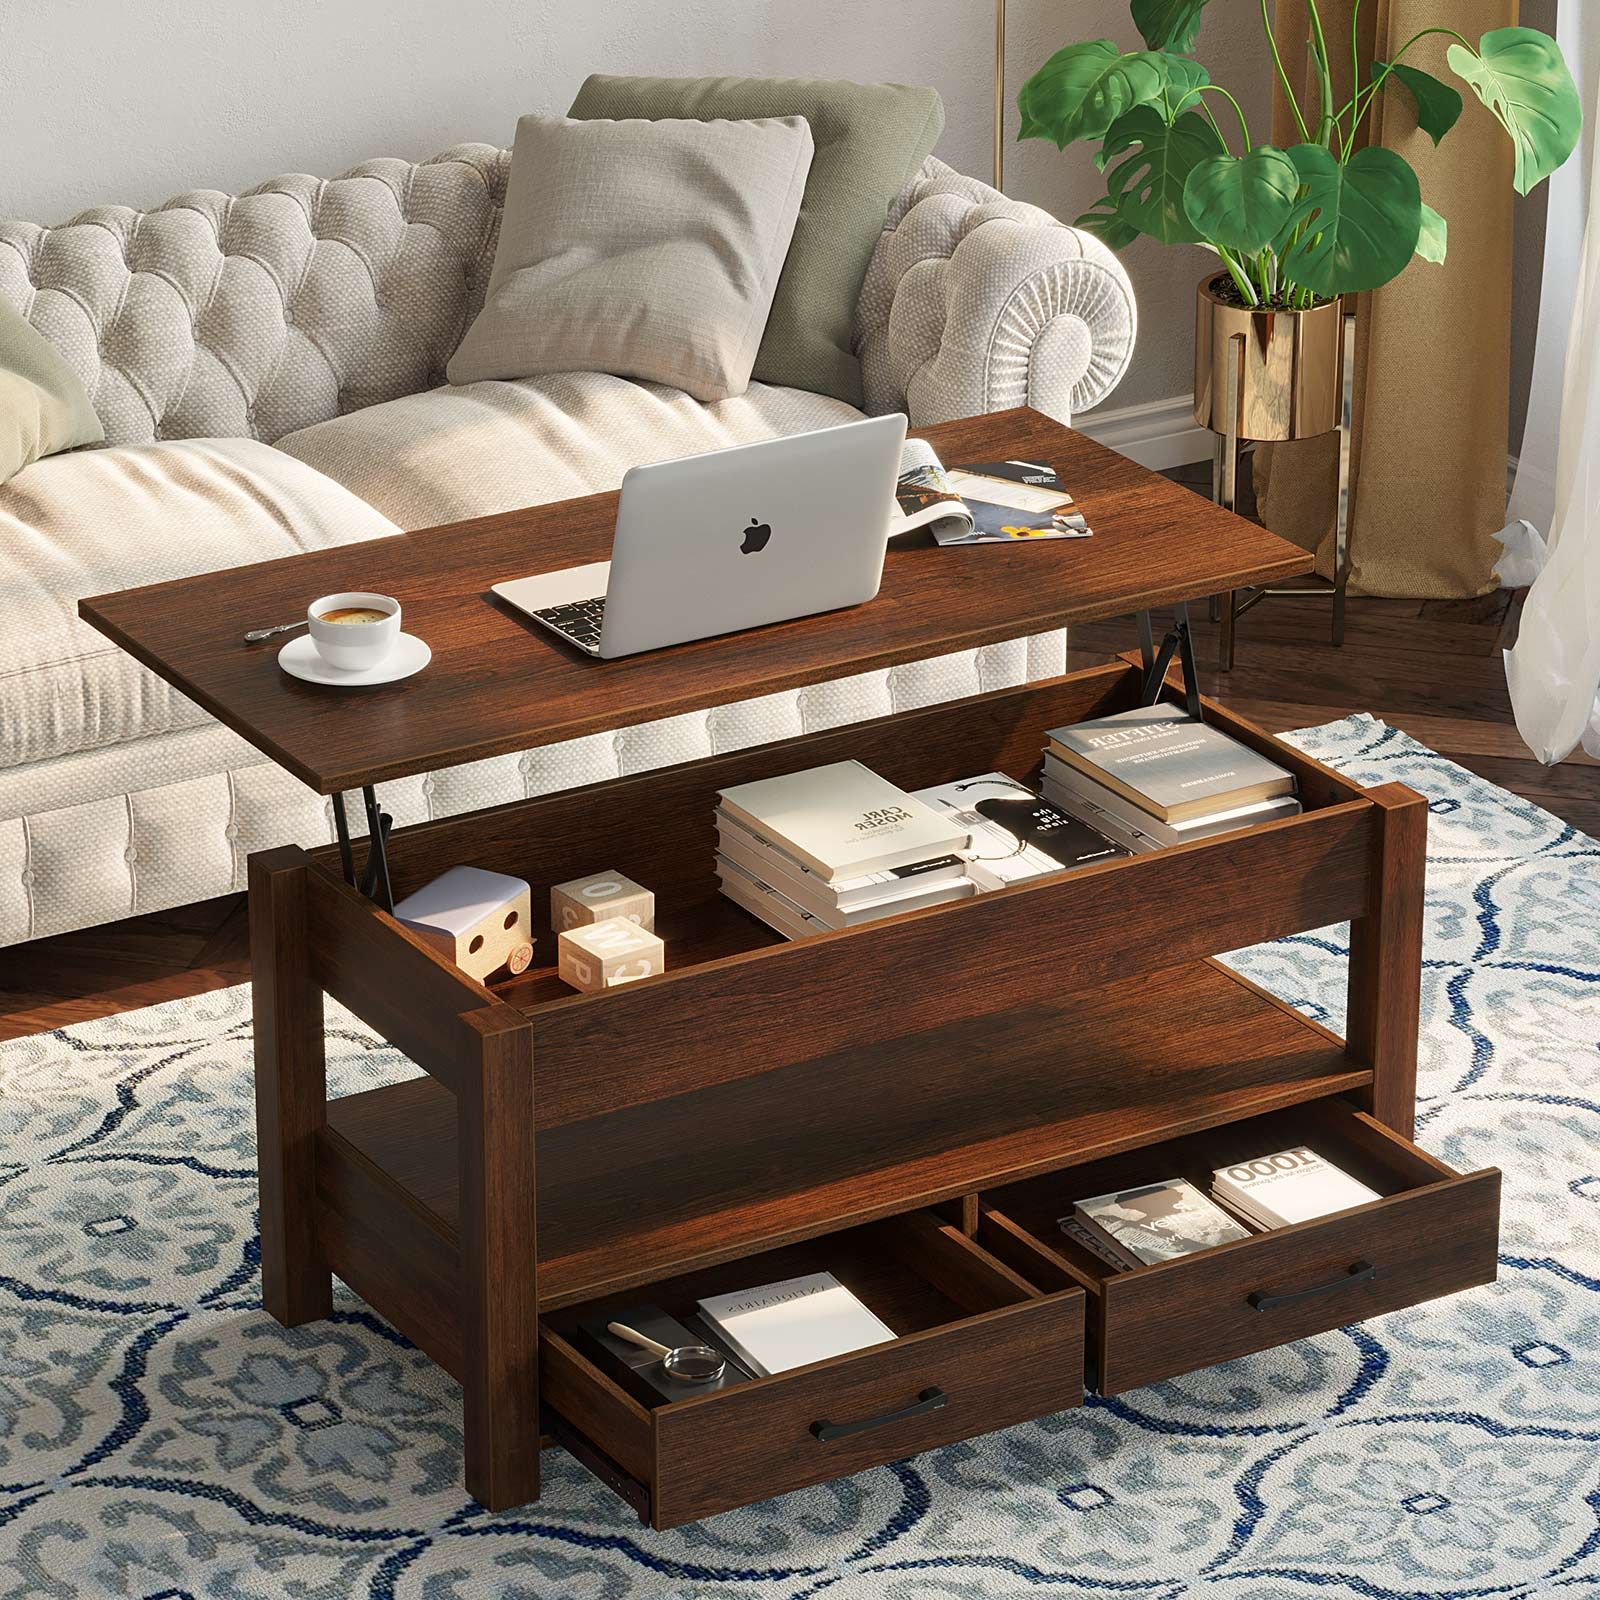 Trendy Rolanstar Coffee Table, Lift Top Coffee Table With Drawers And Hidden Intended For Lift Top Coffee Tables With Shelves (Photo 15 of 15)